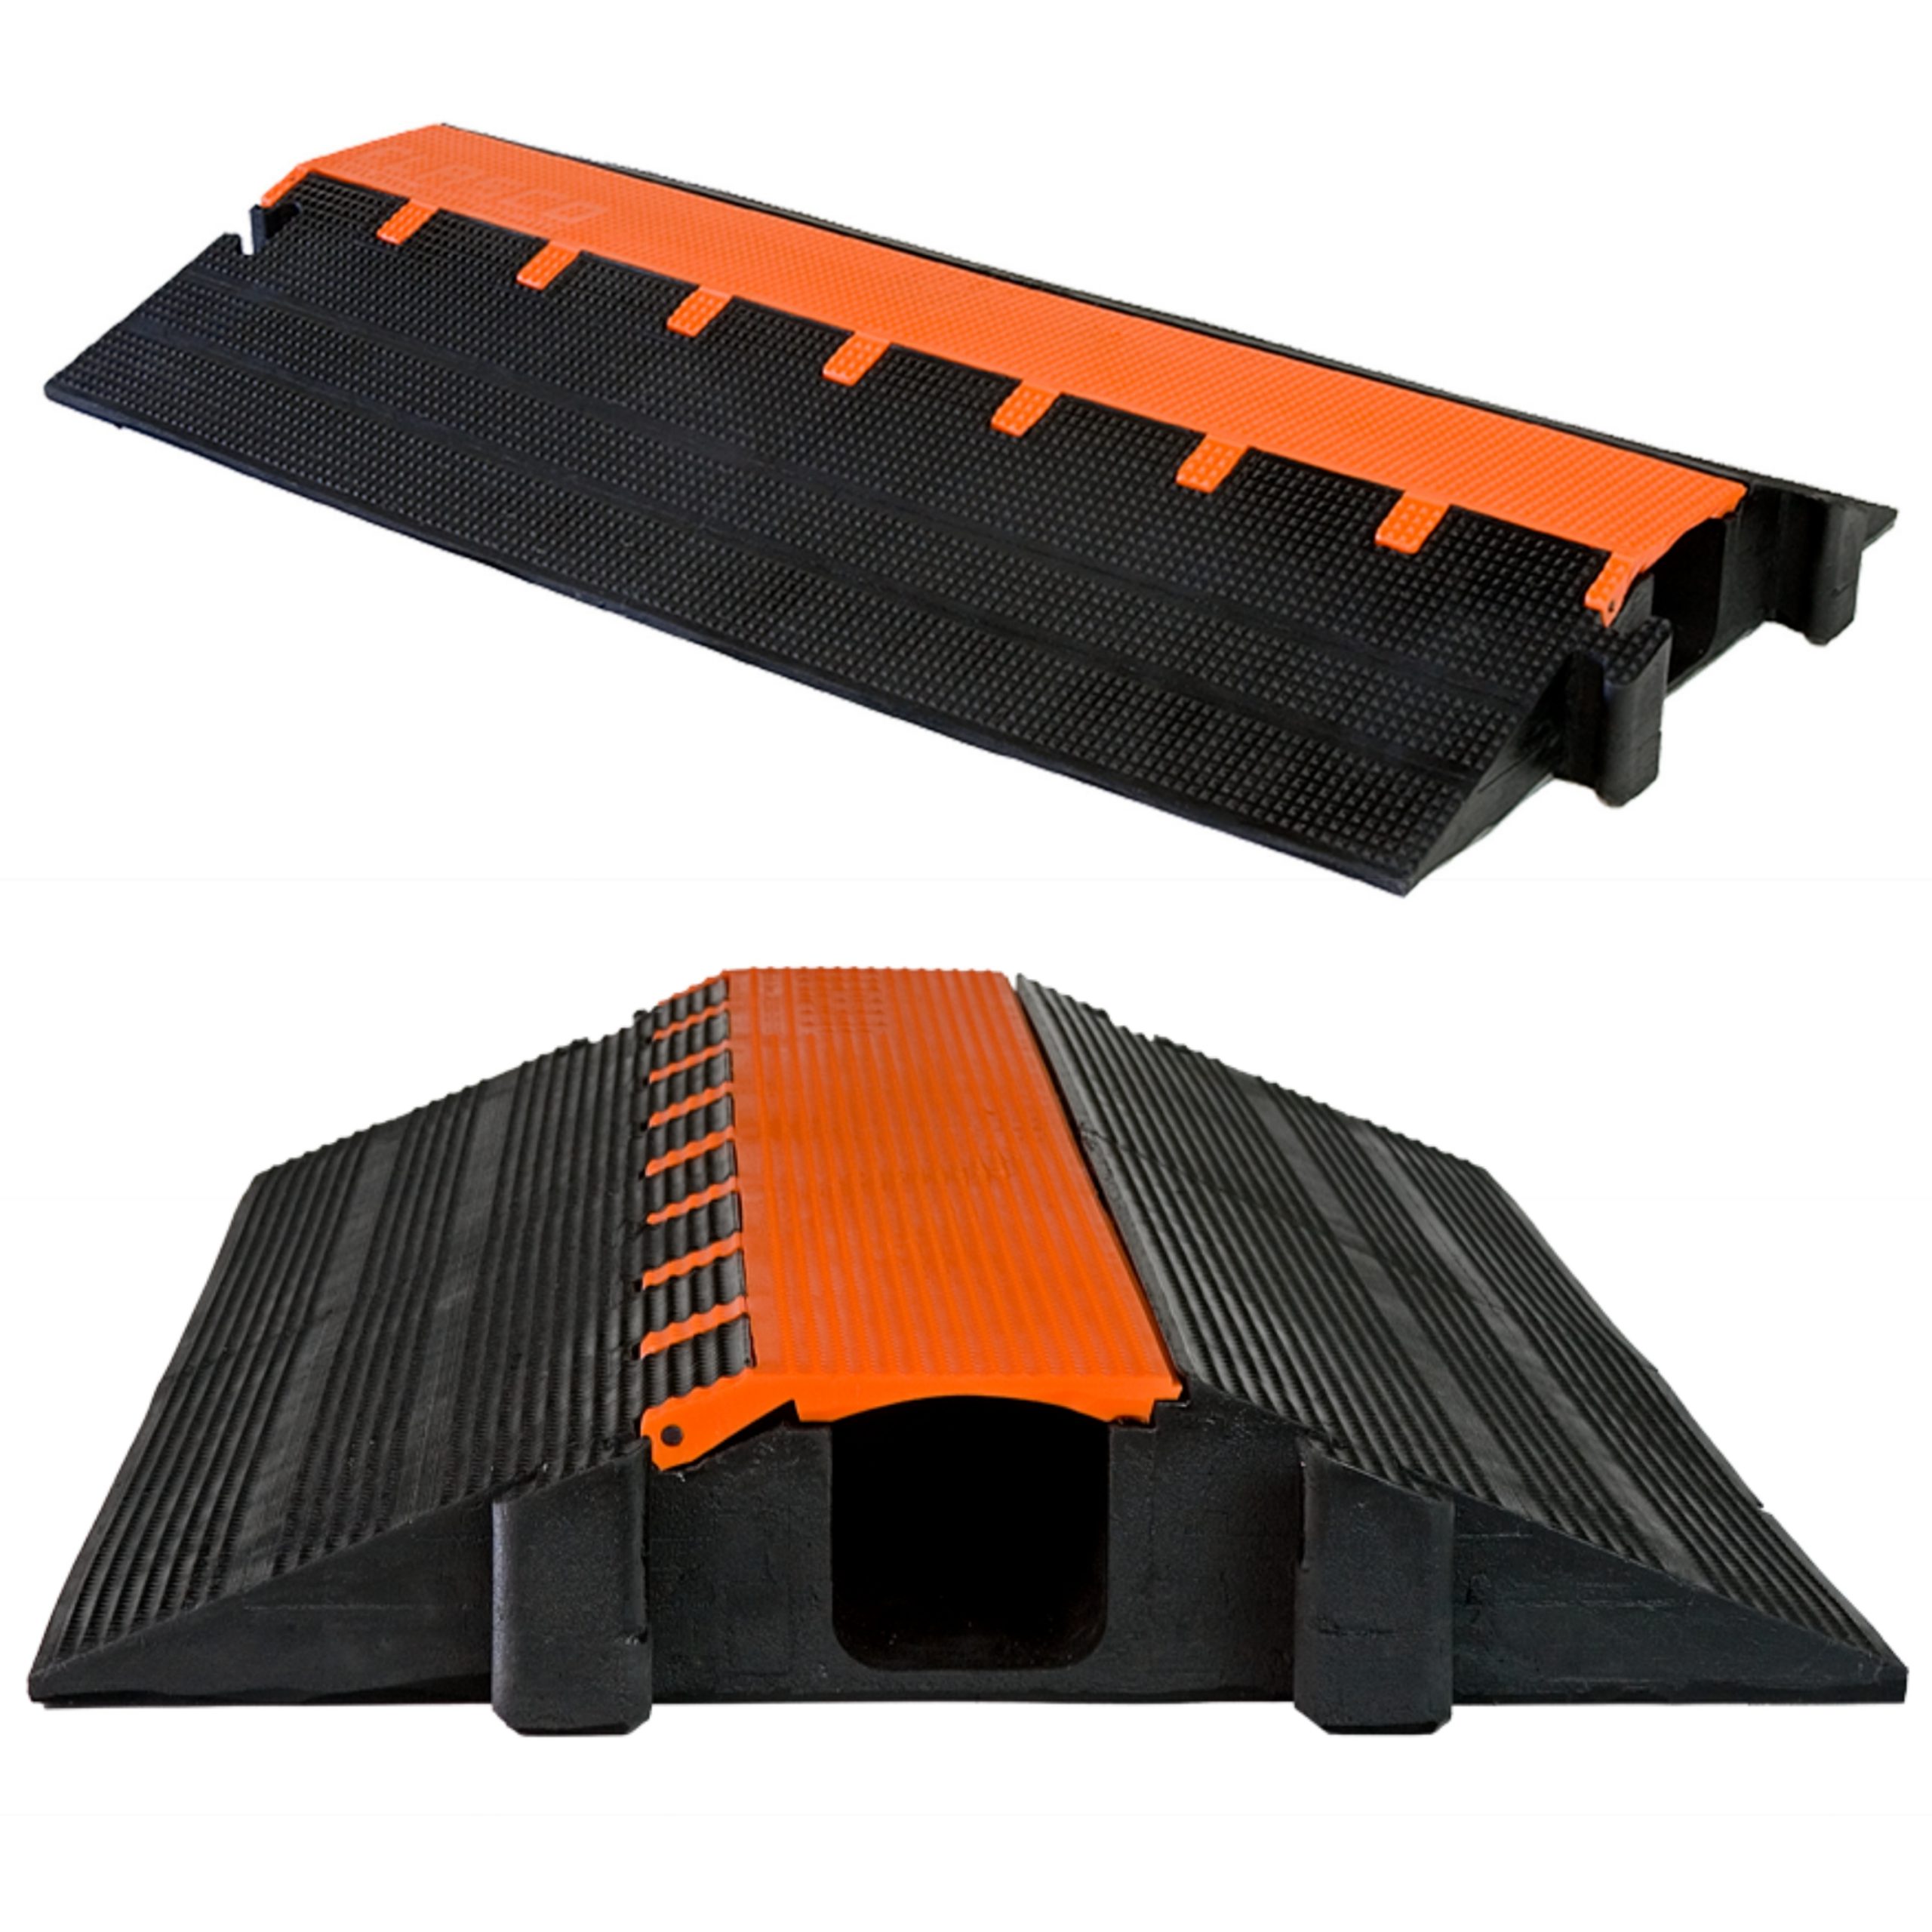 https://www.cableprotectorworks.com/wp-content/uploads/2021/04/Elasco-Products-Mighty-Guard-Cable-Ramp-MG1300-2-scaled.jpg